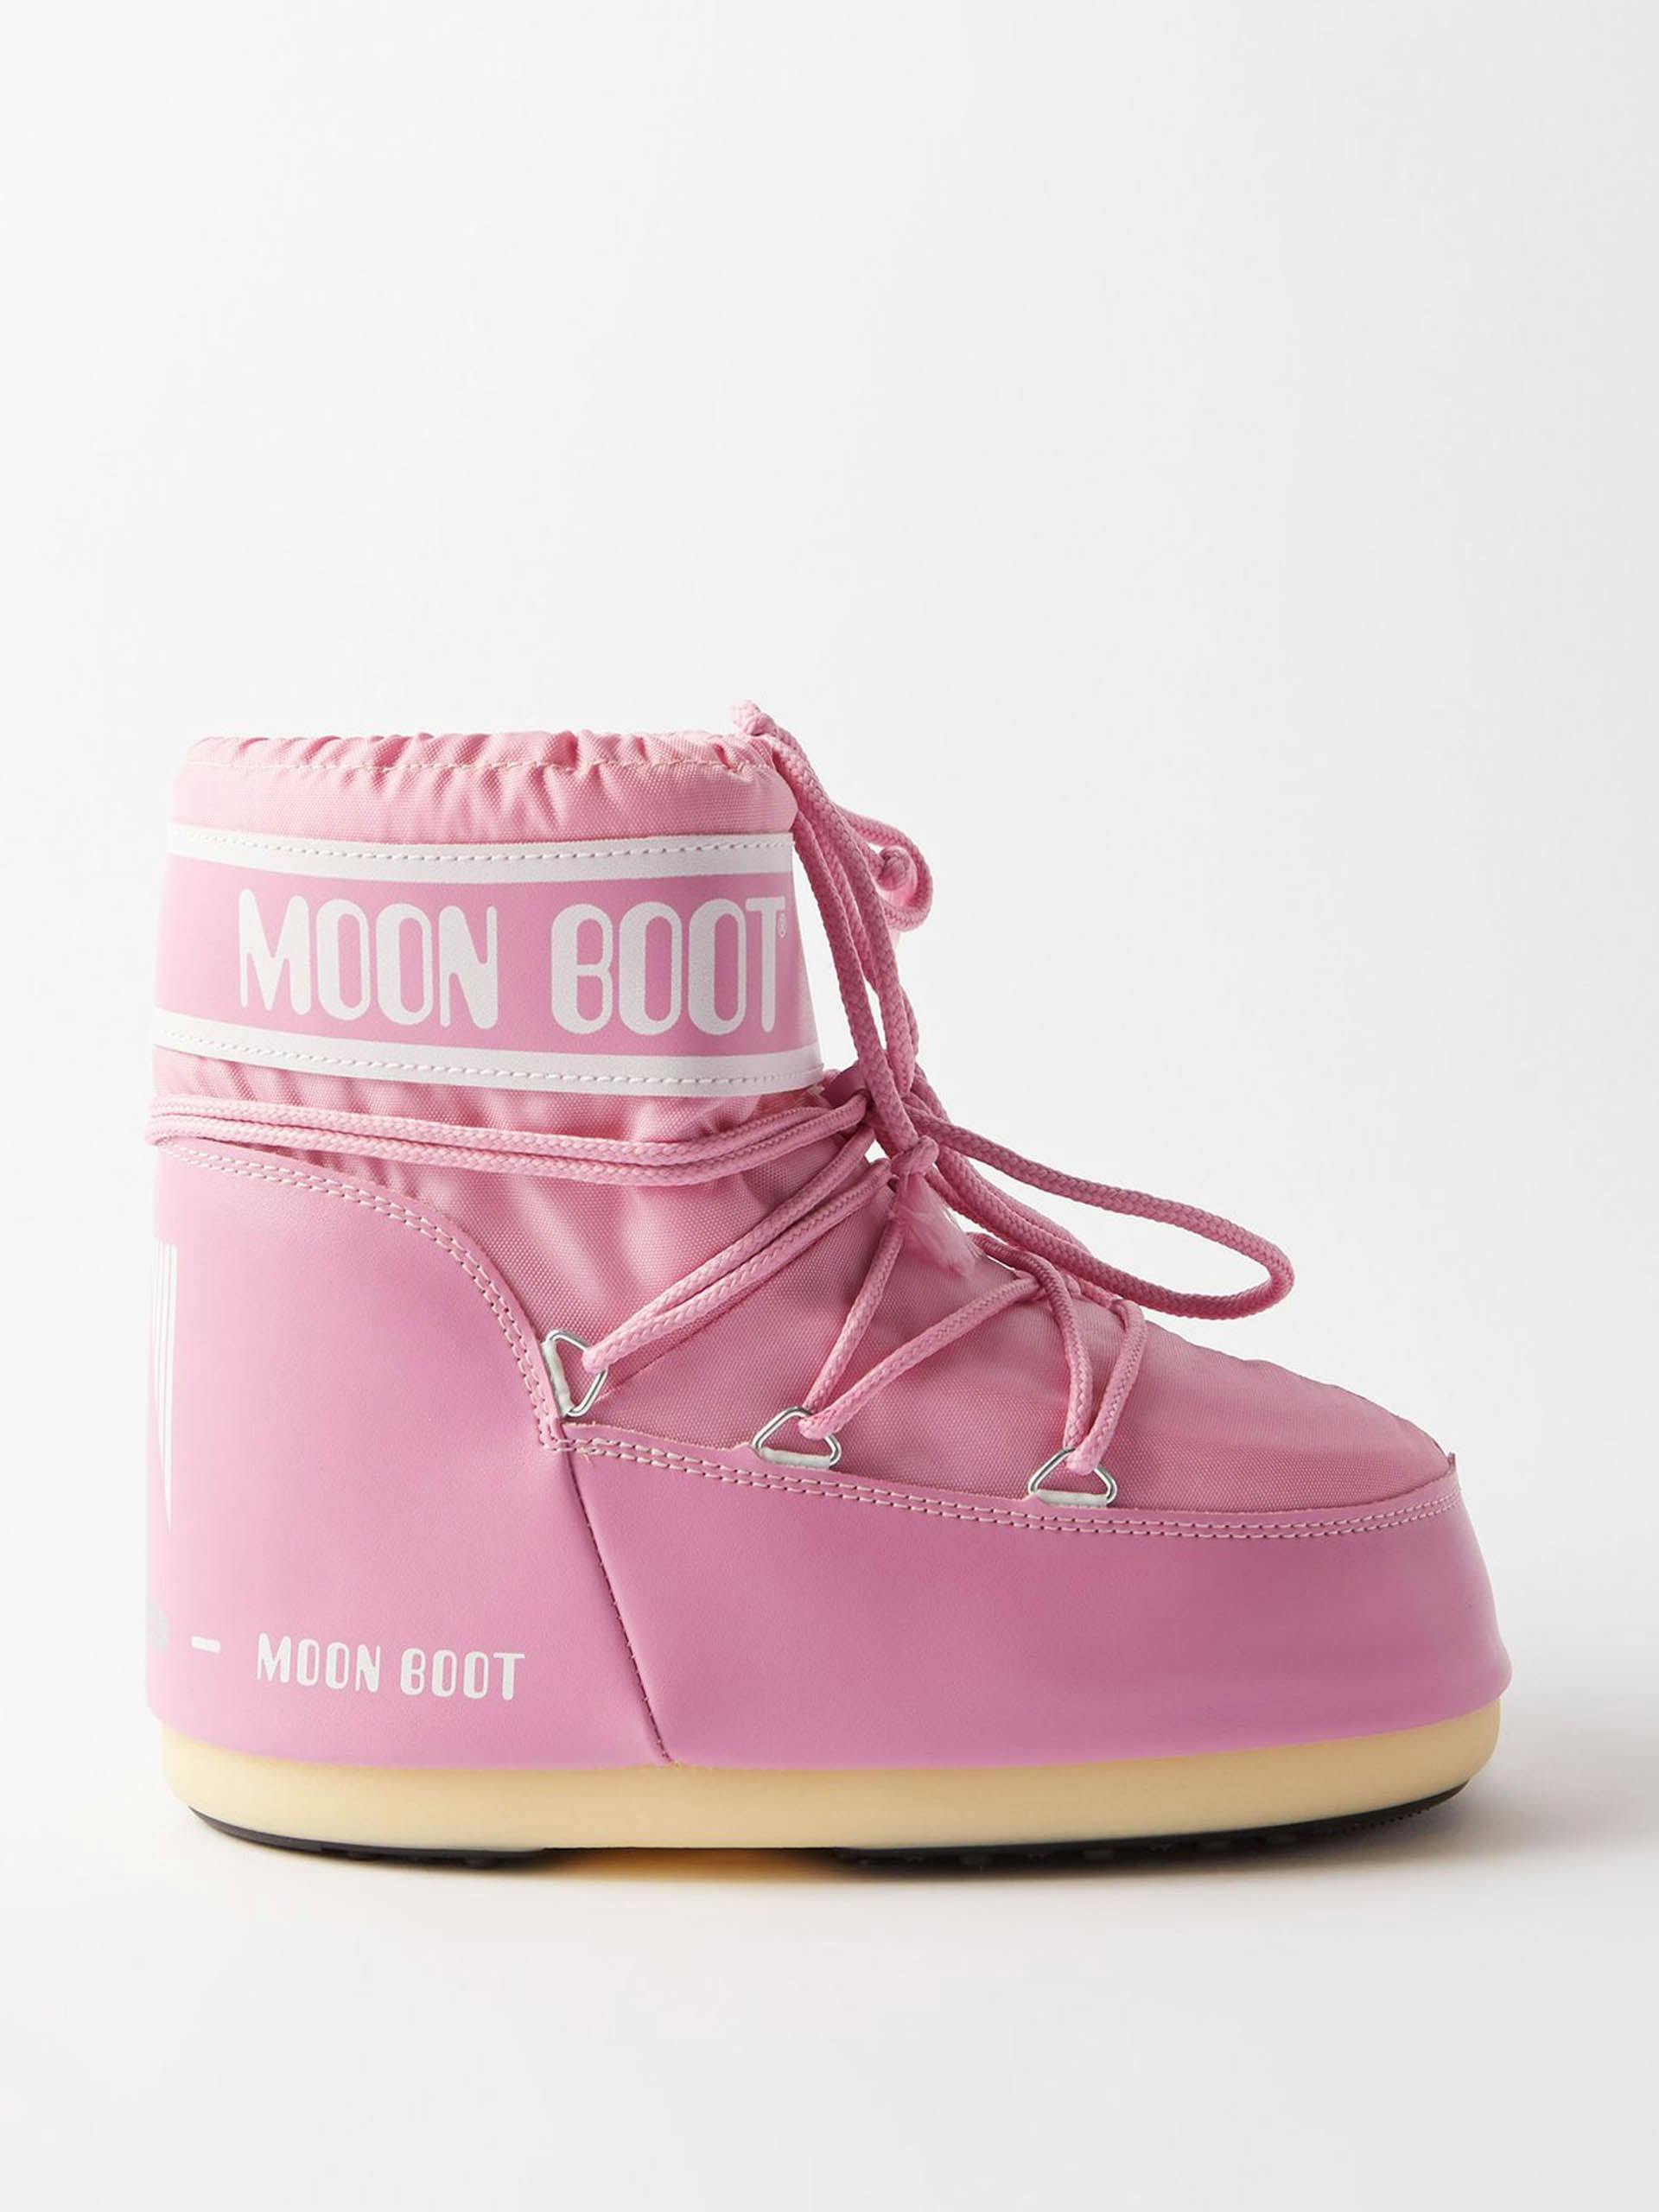 Pink snow boots